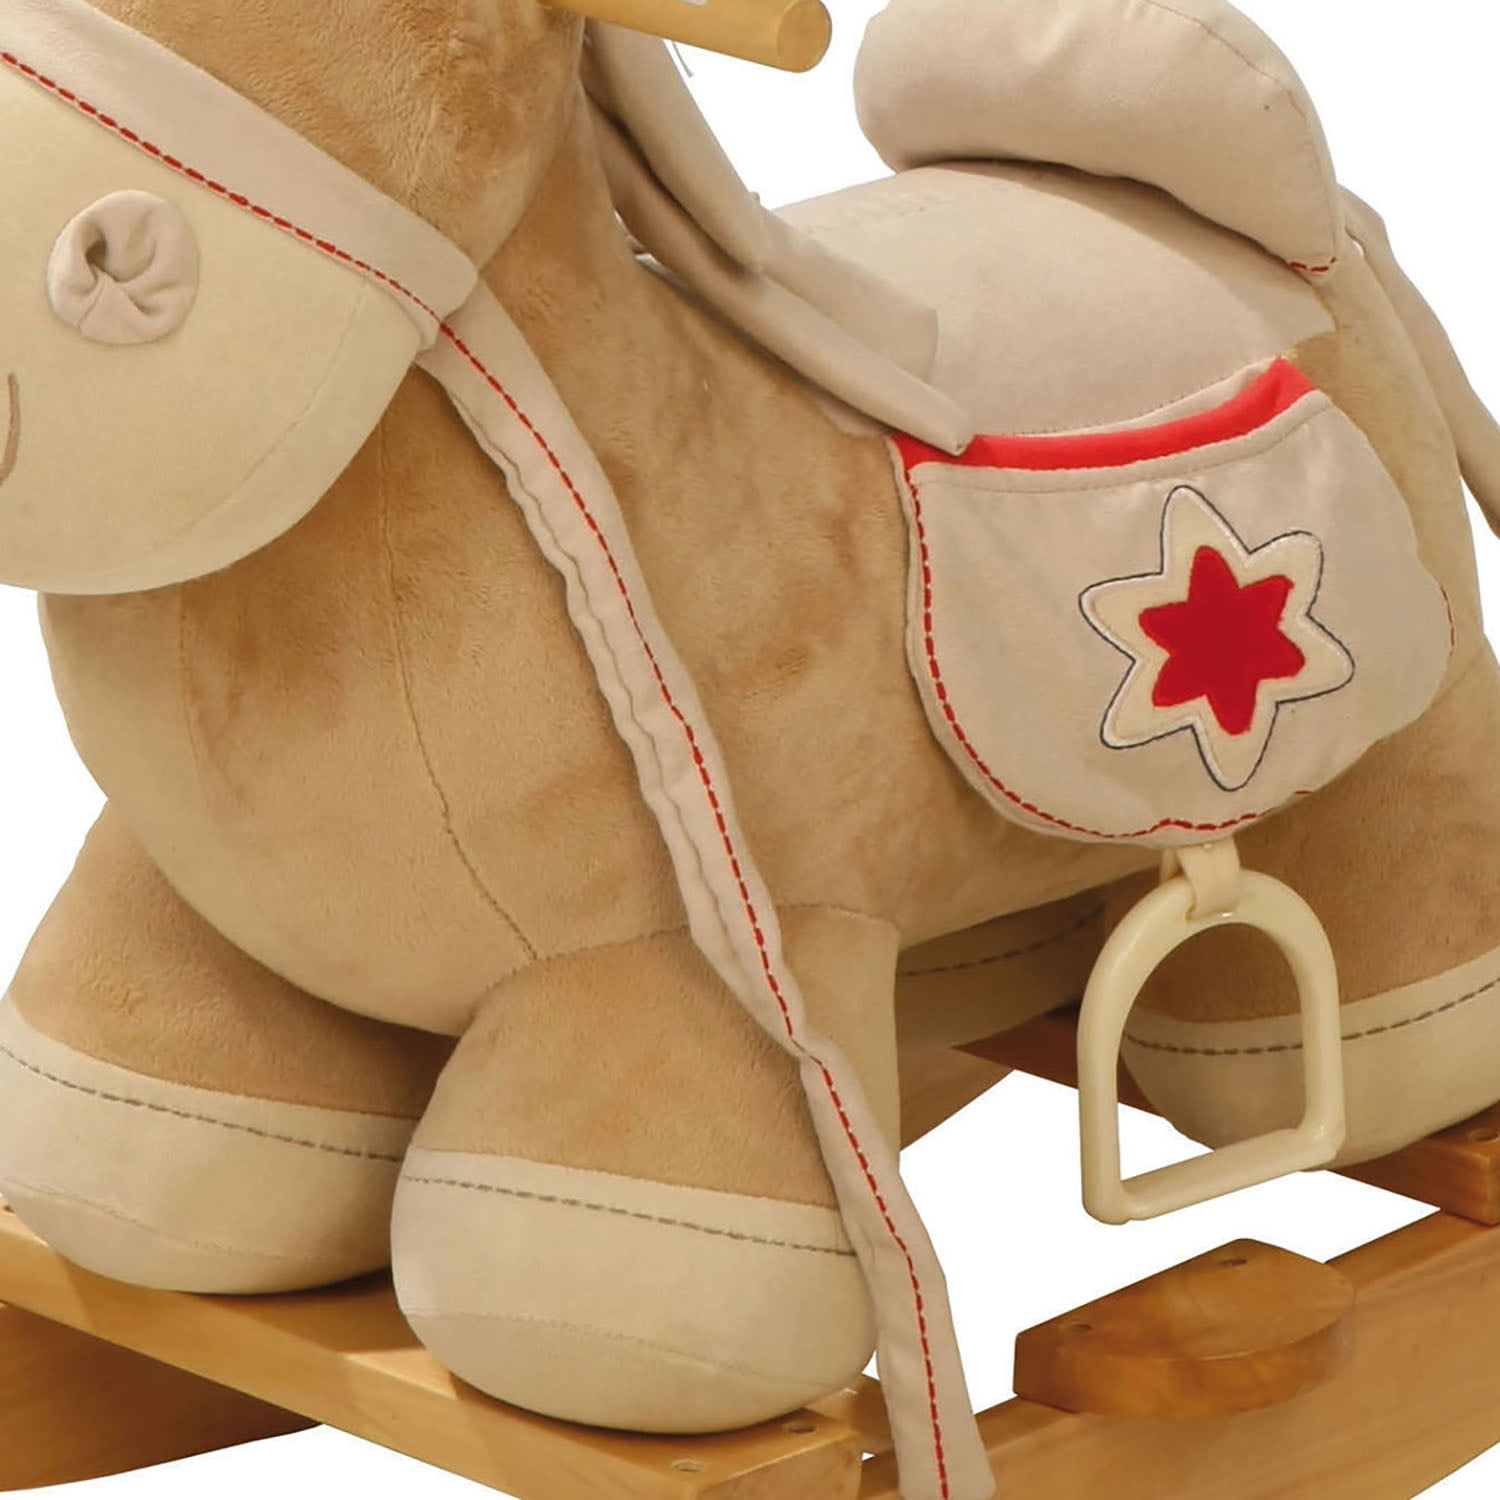 Rocking - 12+ Roba Months Plush Horse: Embroidered Soft Animal & Upholstery Rocking Solid With Stirrup, For Rocker, Wood